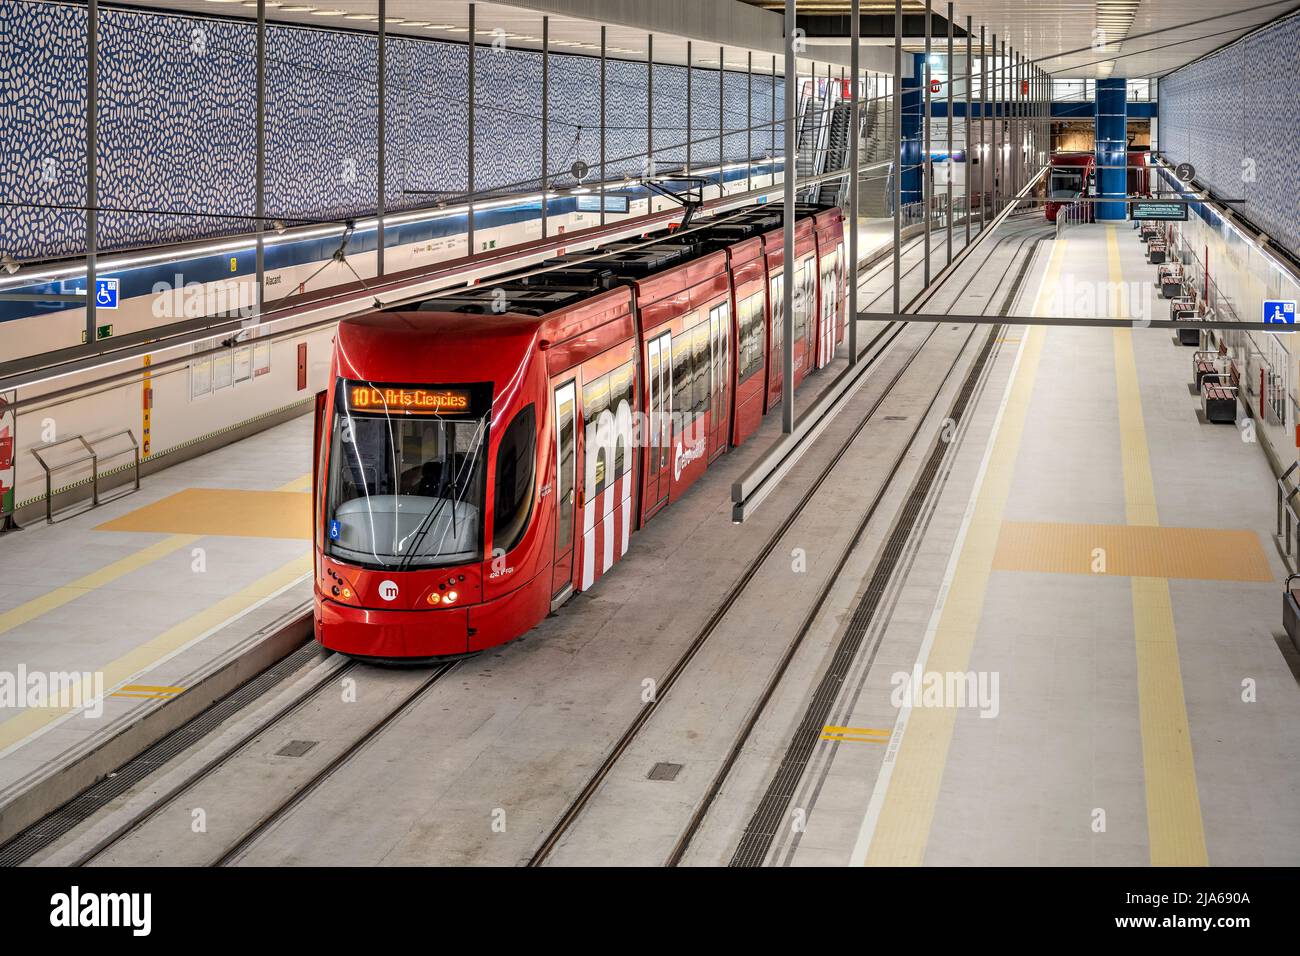 Tram of Line 10 light railway at Alacant station, Valencia, Spain Stock Photo